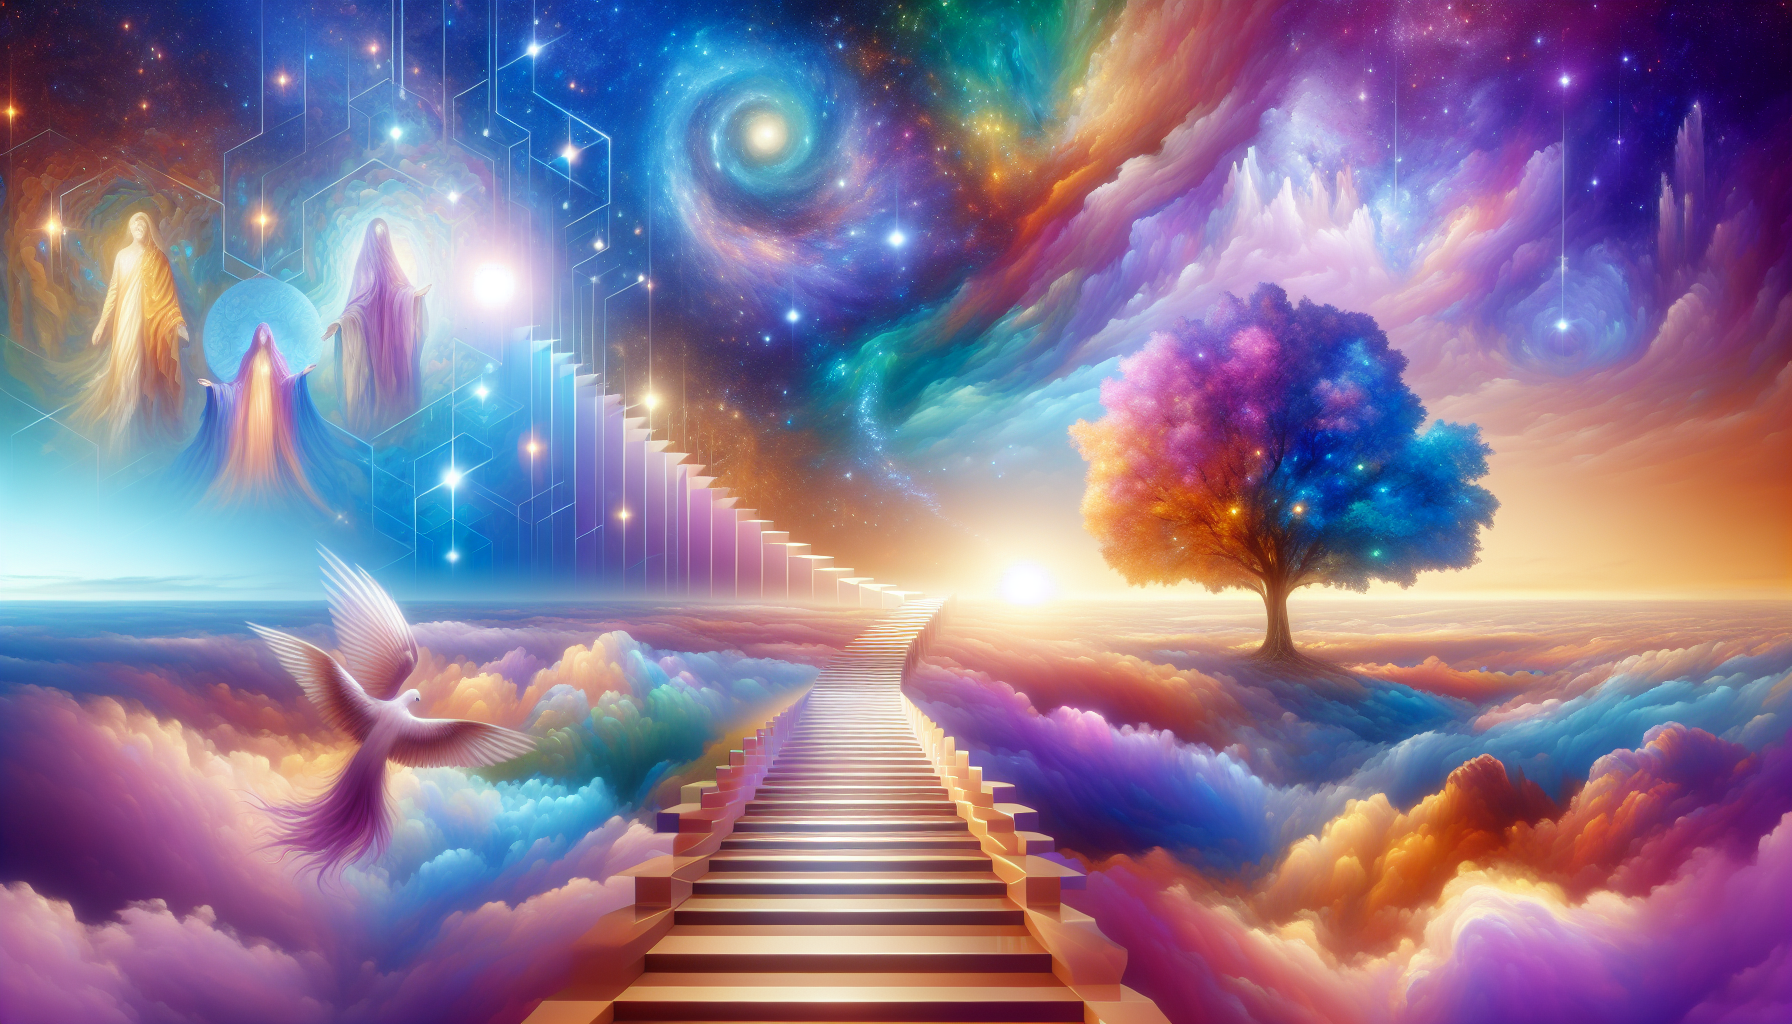 Create a surreal and ethereal scene that represents the concept of Eternal Life. Incorporate elements such as an infinite staircase leading to the heavens, a glowing tree symbolizing immortality, and